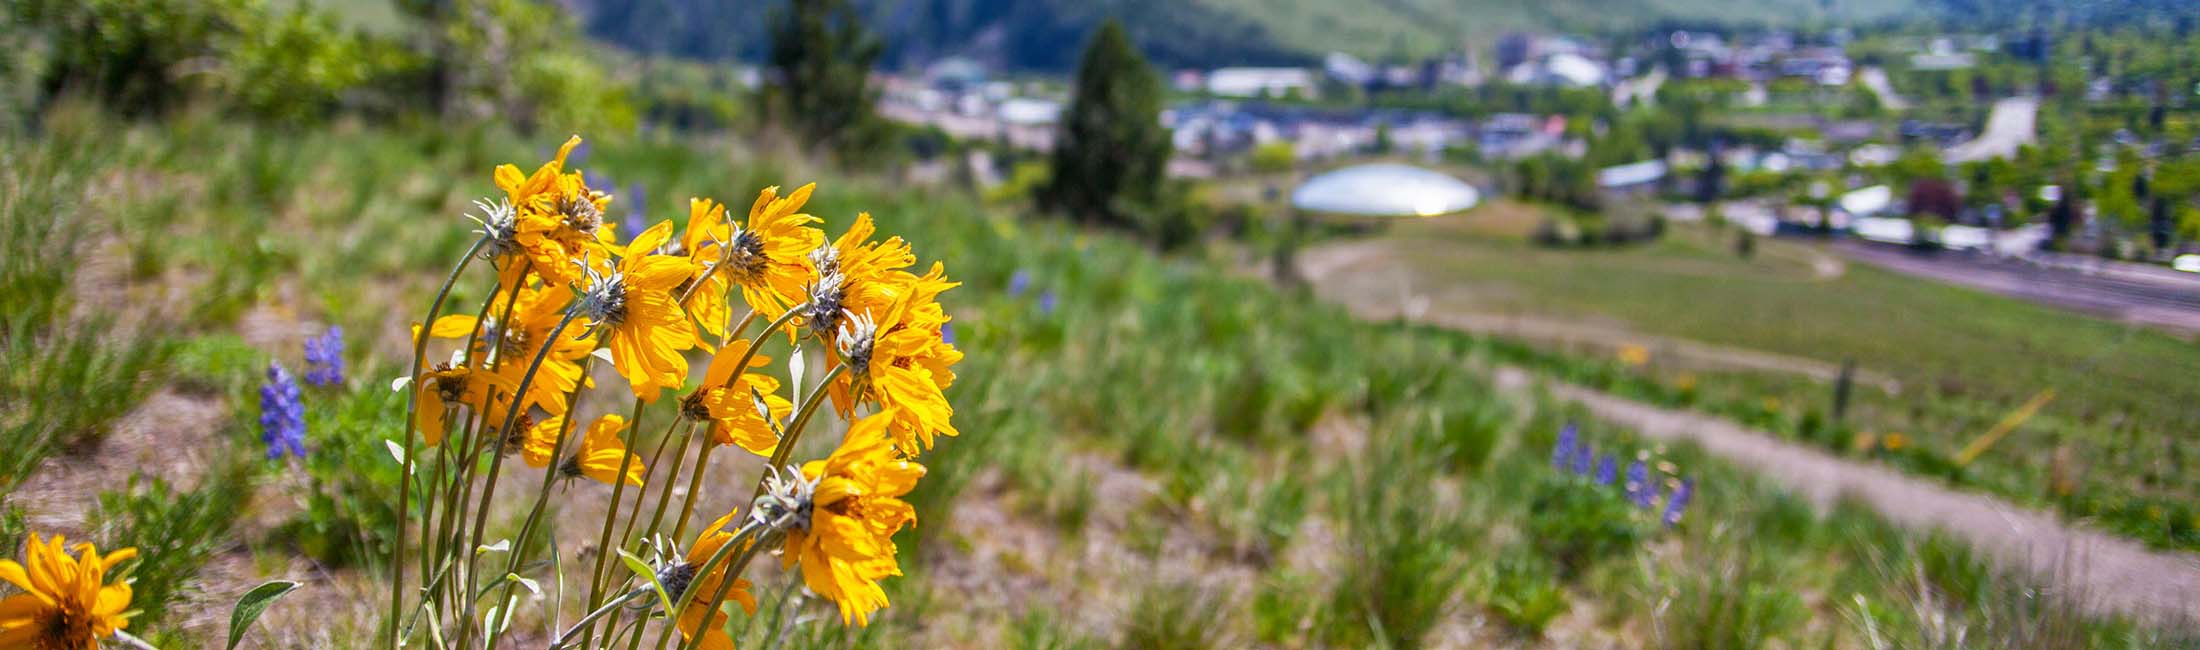 5 Popular Wildflowers in Missoula and Where to Find Them